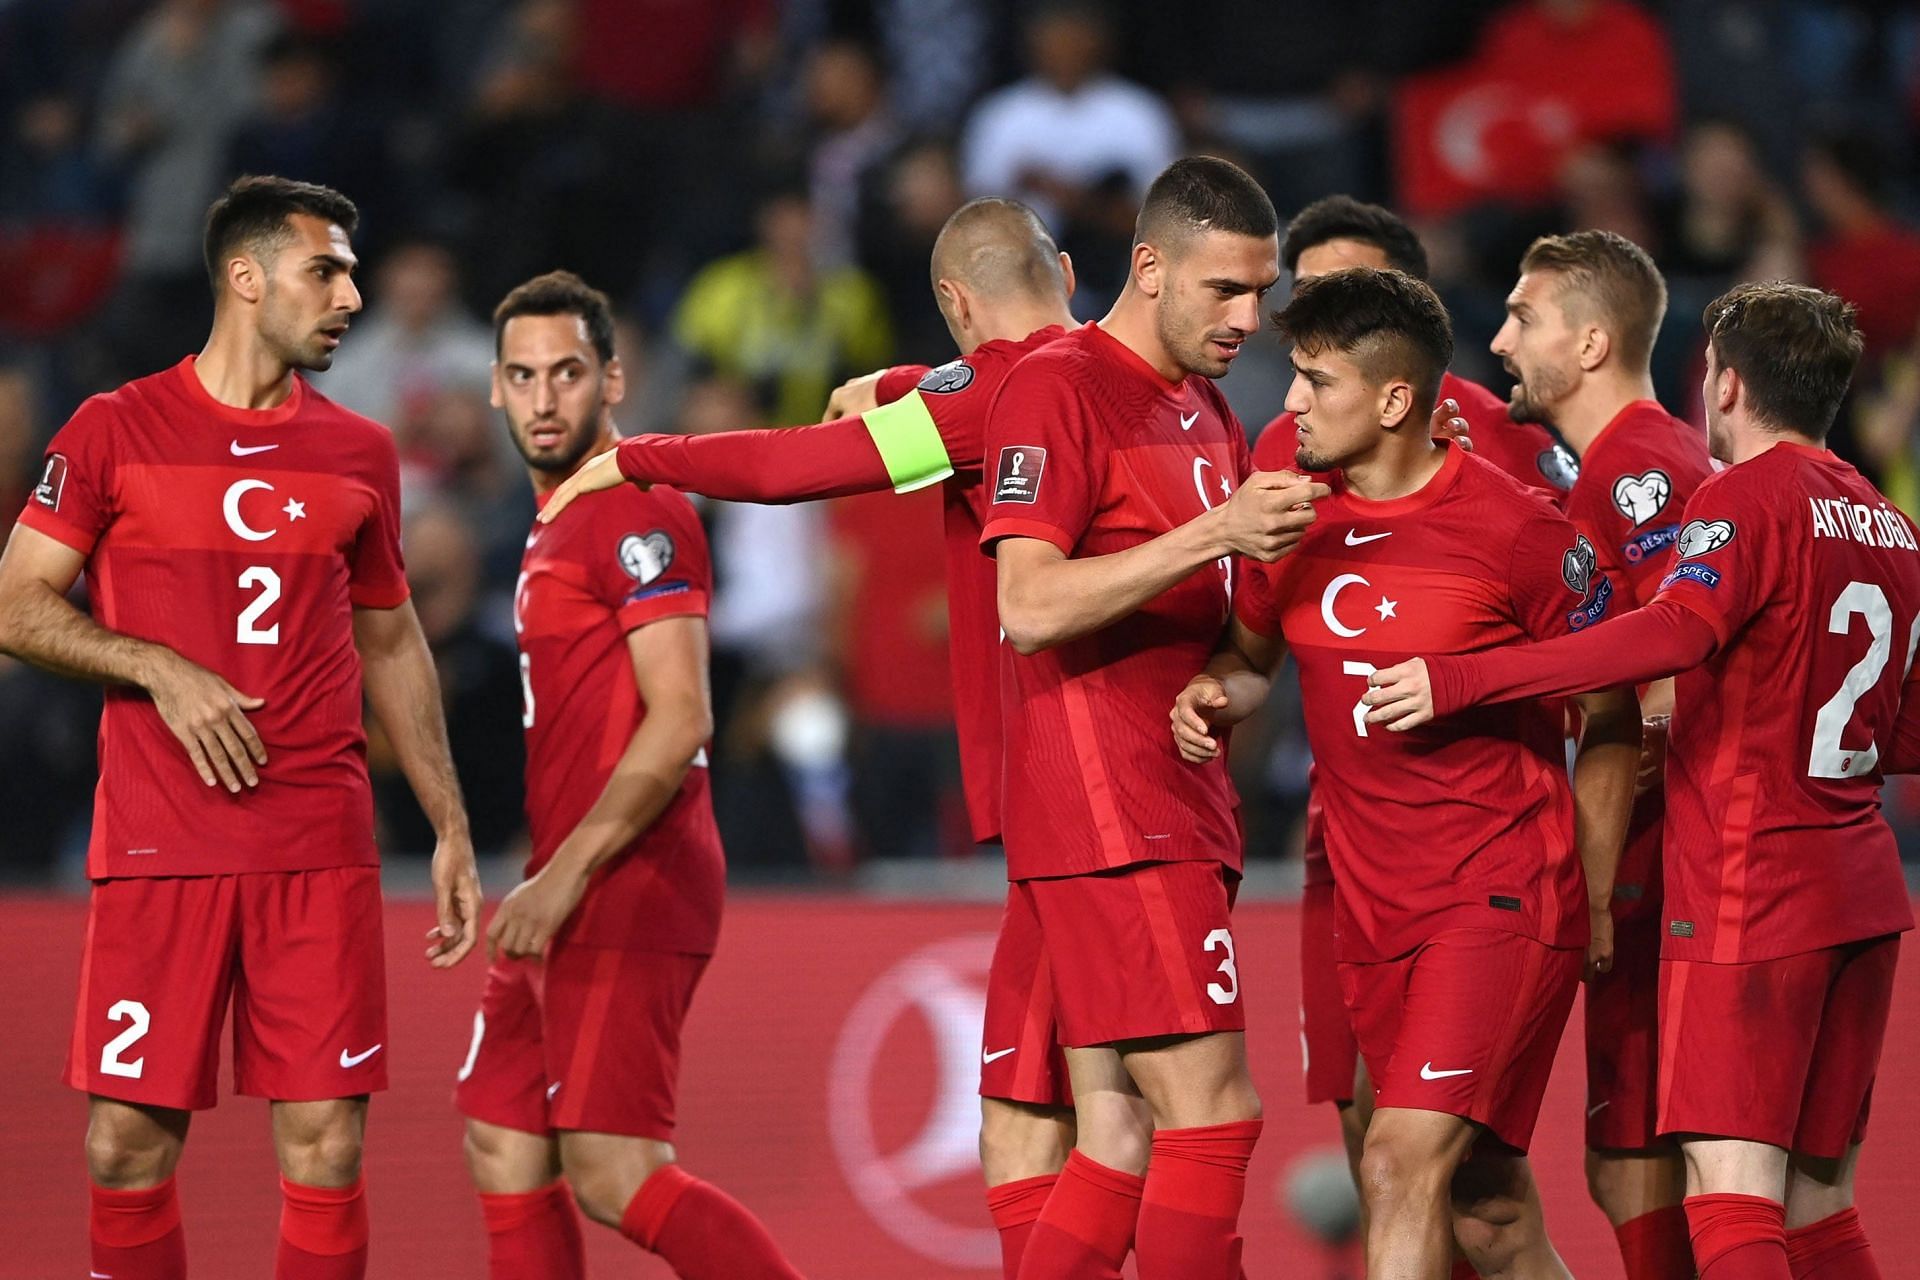 Turkey are looking to qualify for the World Cup for the first time since 2002